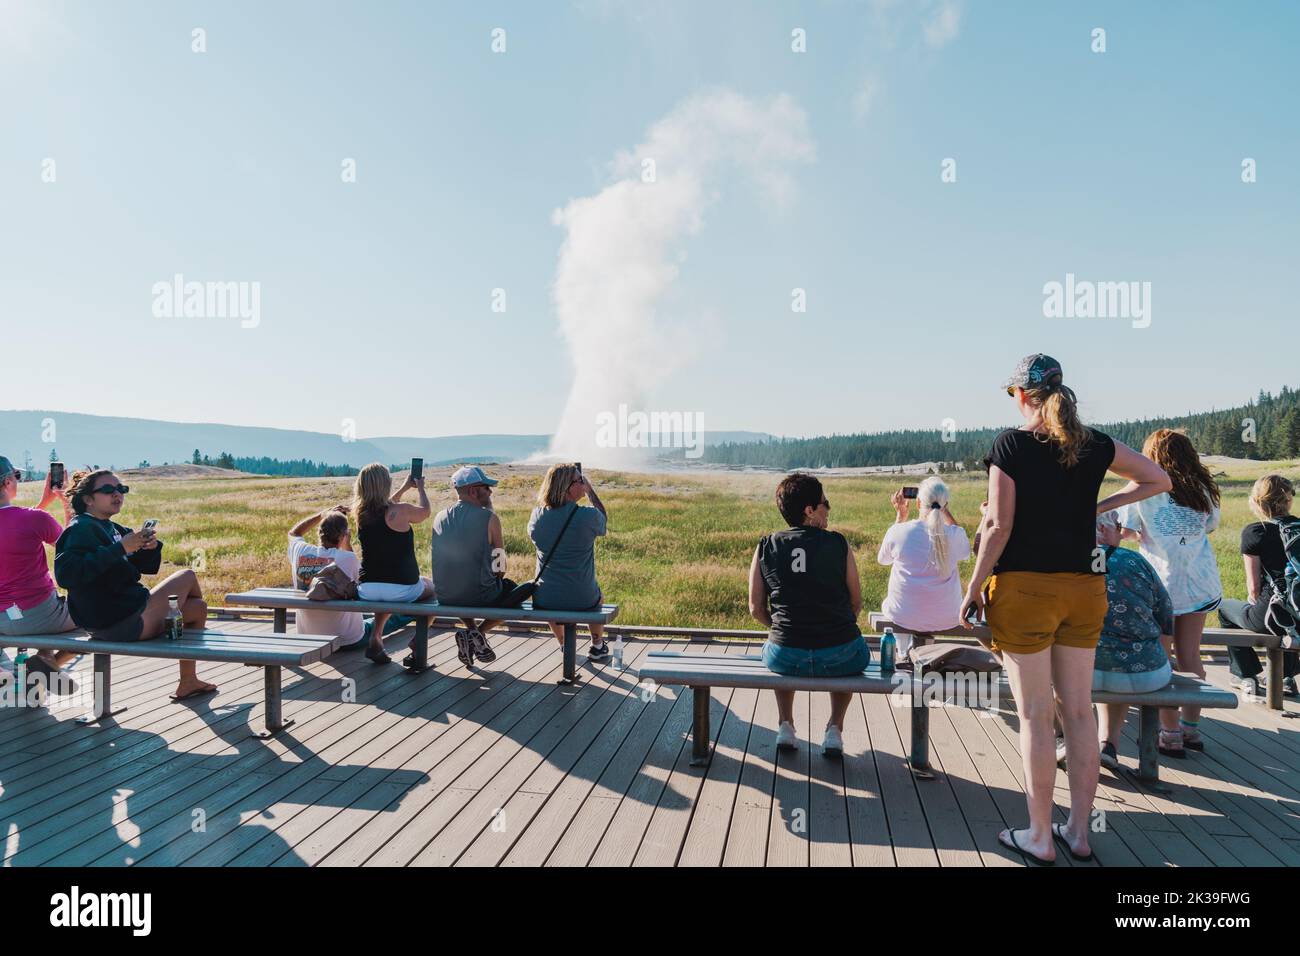 Wyoming, USA - July 19, 2022: Tourists watch Old Faithful geyser erupt from the boardwalk viewing area Stock Photo